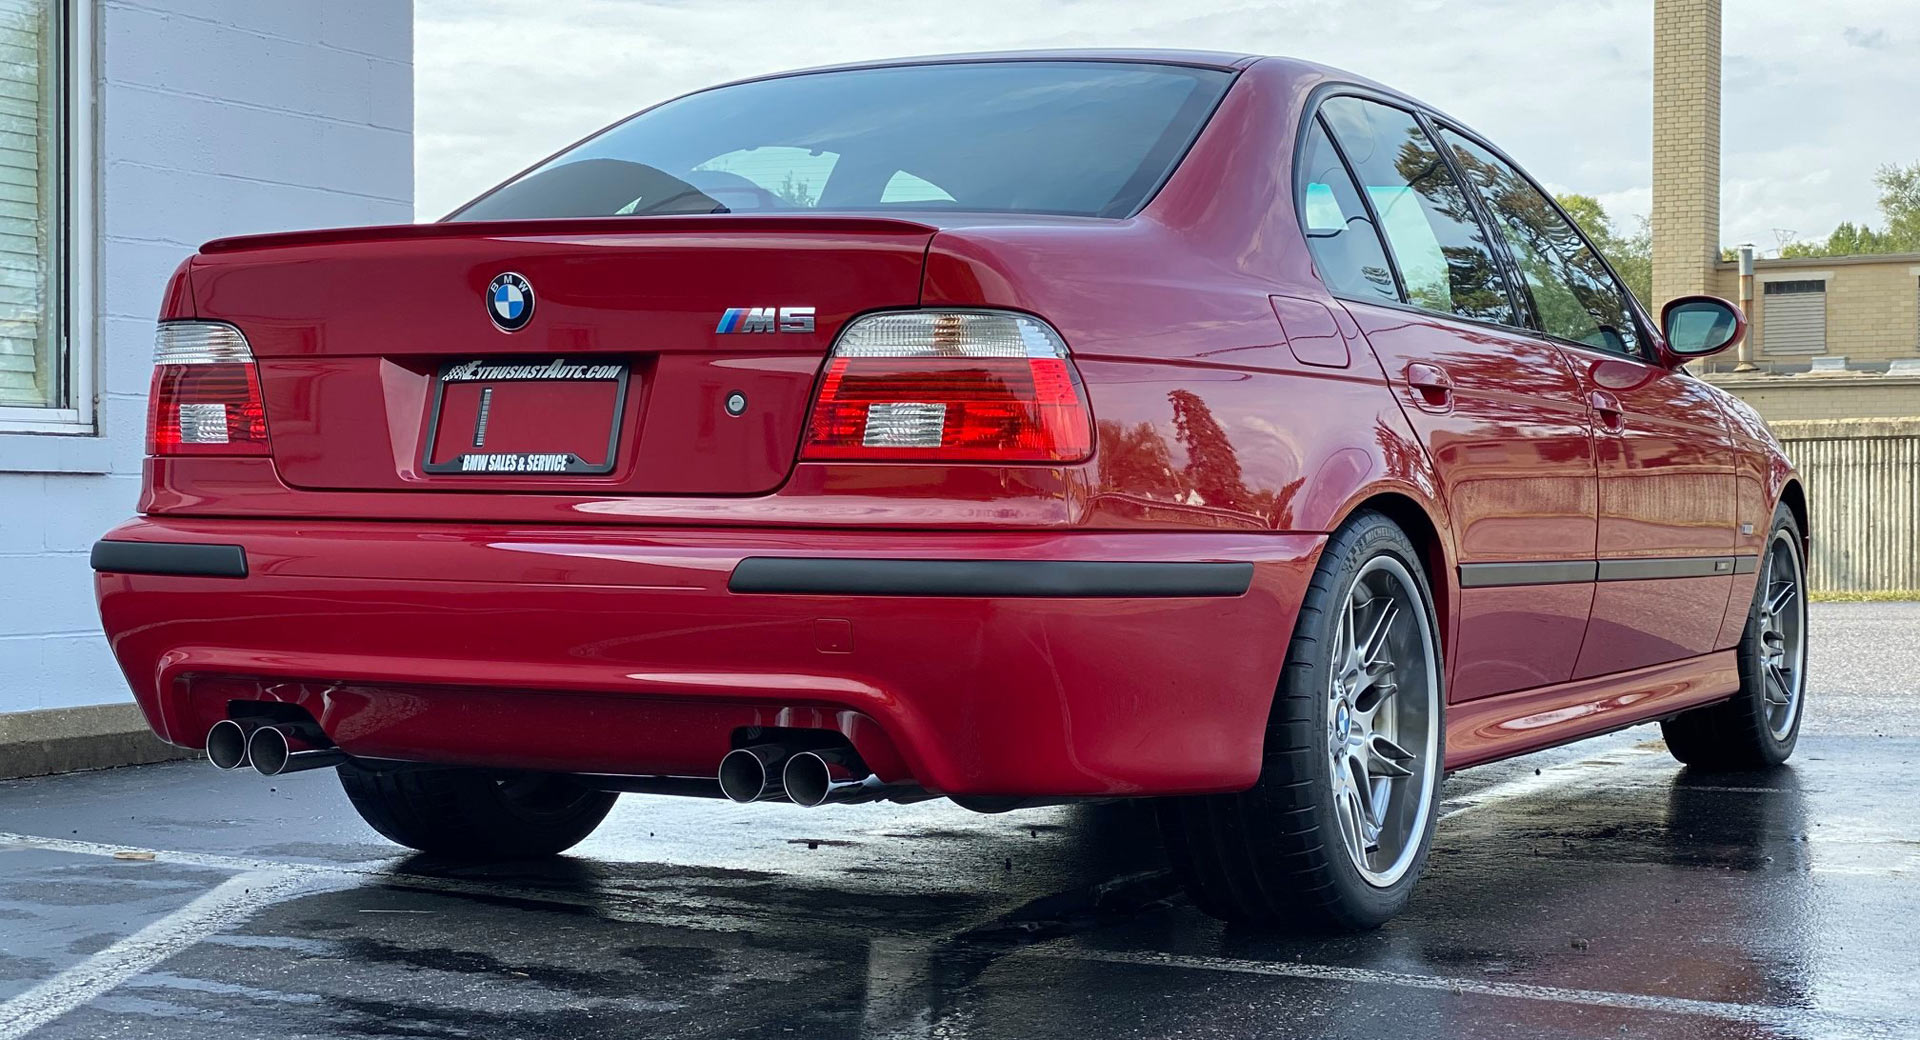 Low-Mileage BMW E39 M5 Is Certainly Desirable – But $150K Desirable?